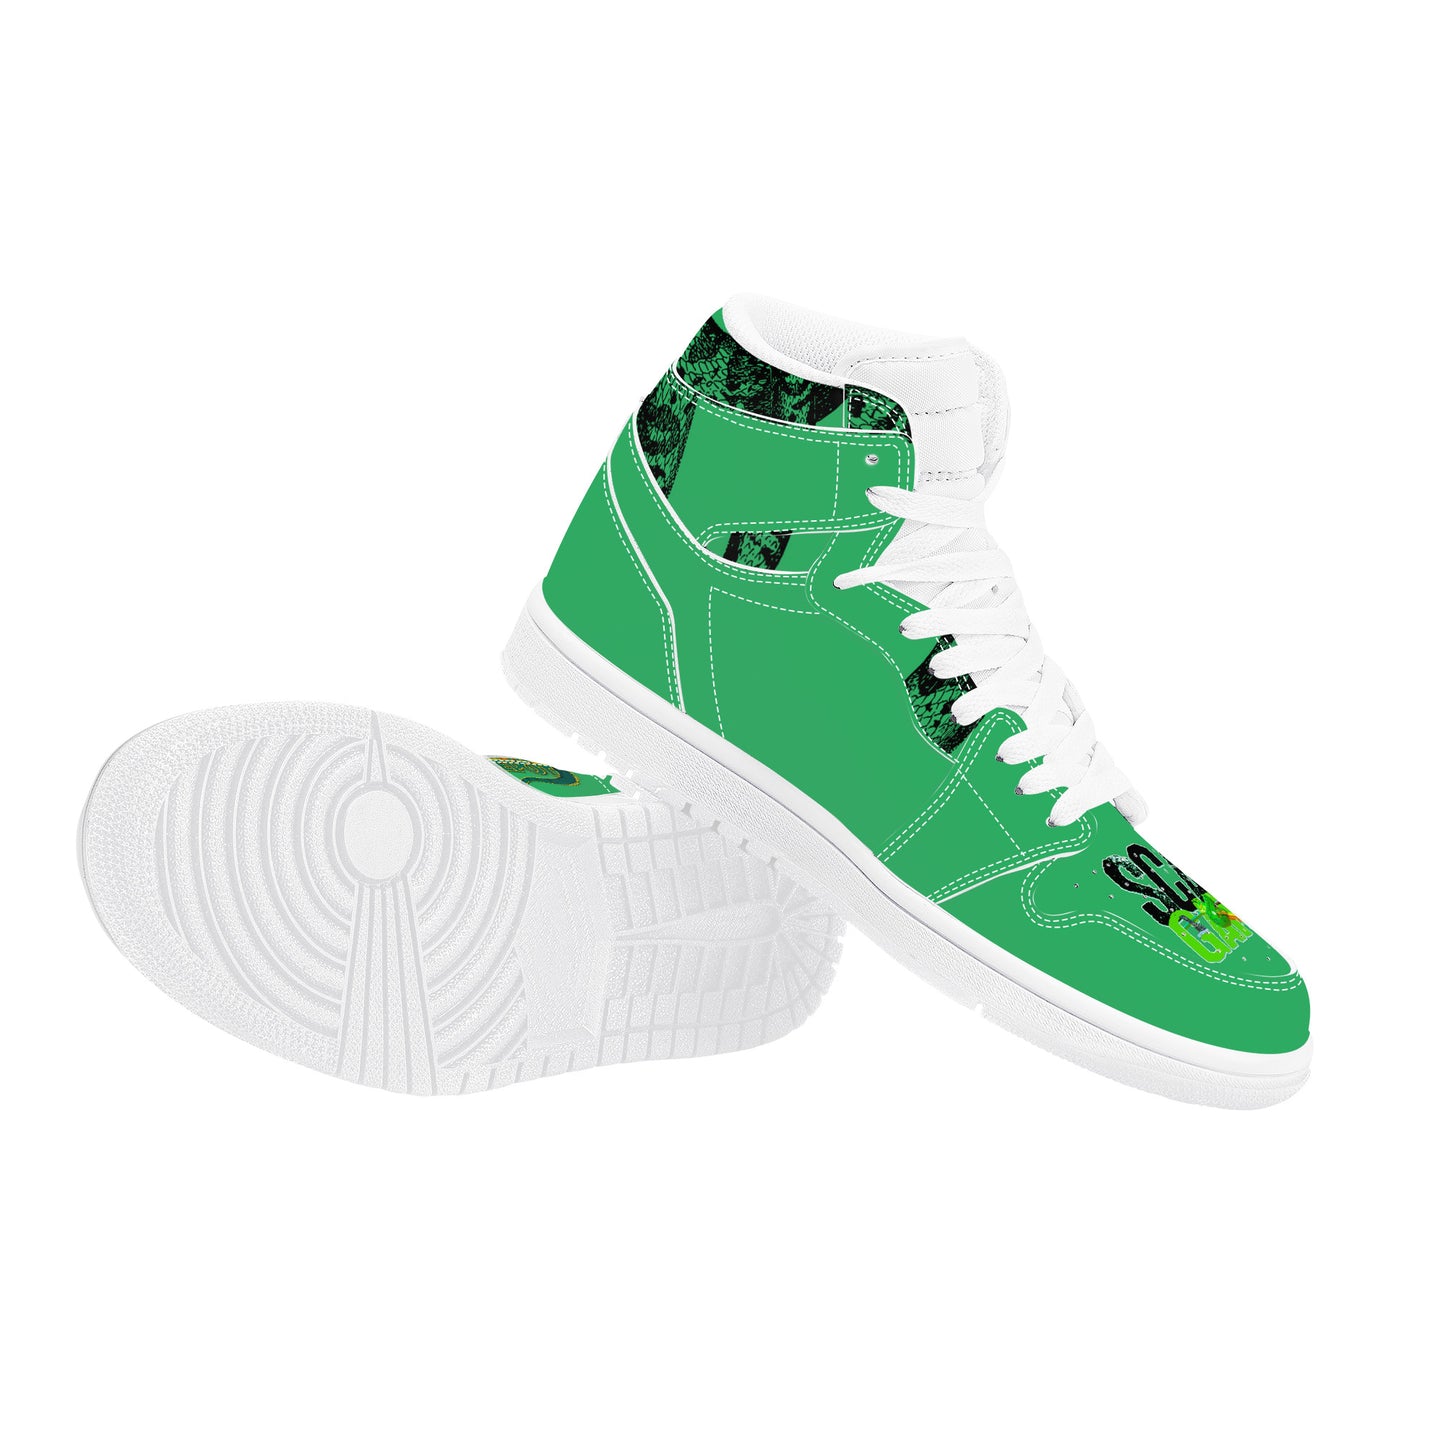 Scale Gang D17 High Top Synthetic Leather Sneaker